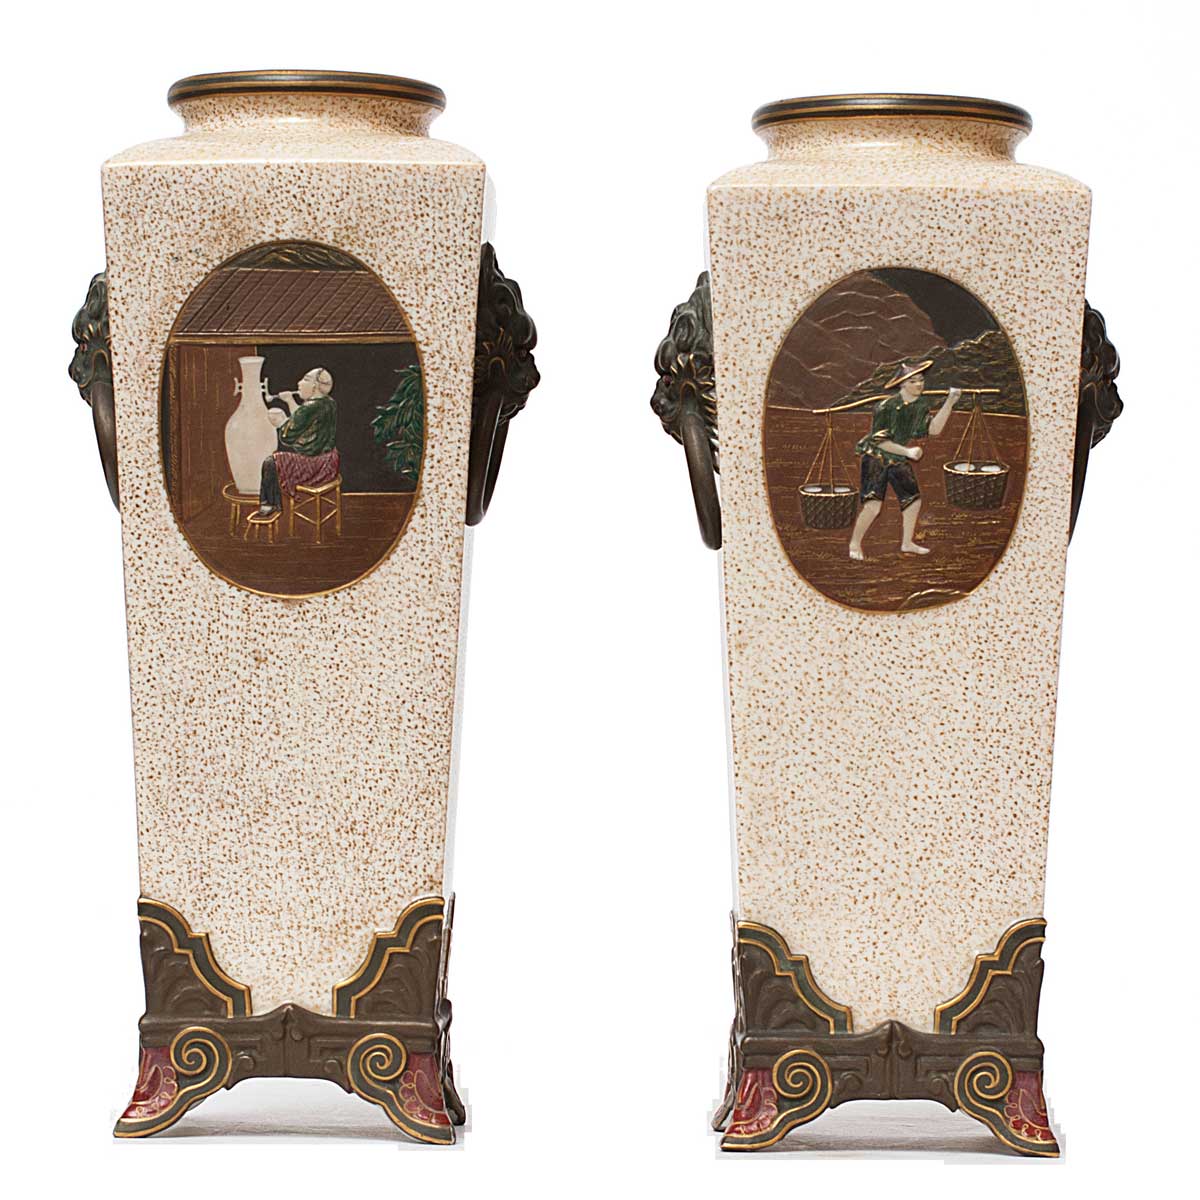 Pair of 1874 Royal Worcester Chinoiserie Vases